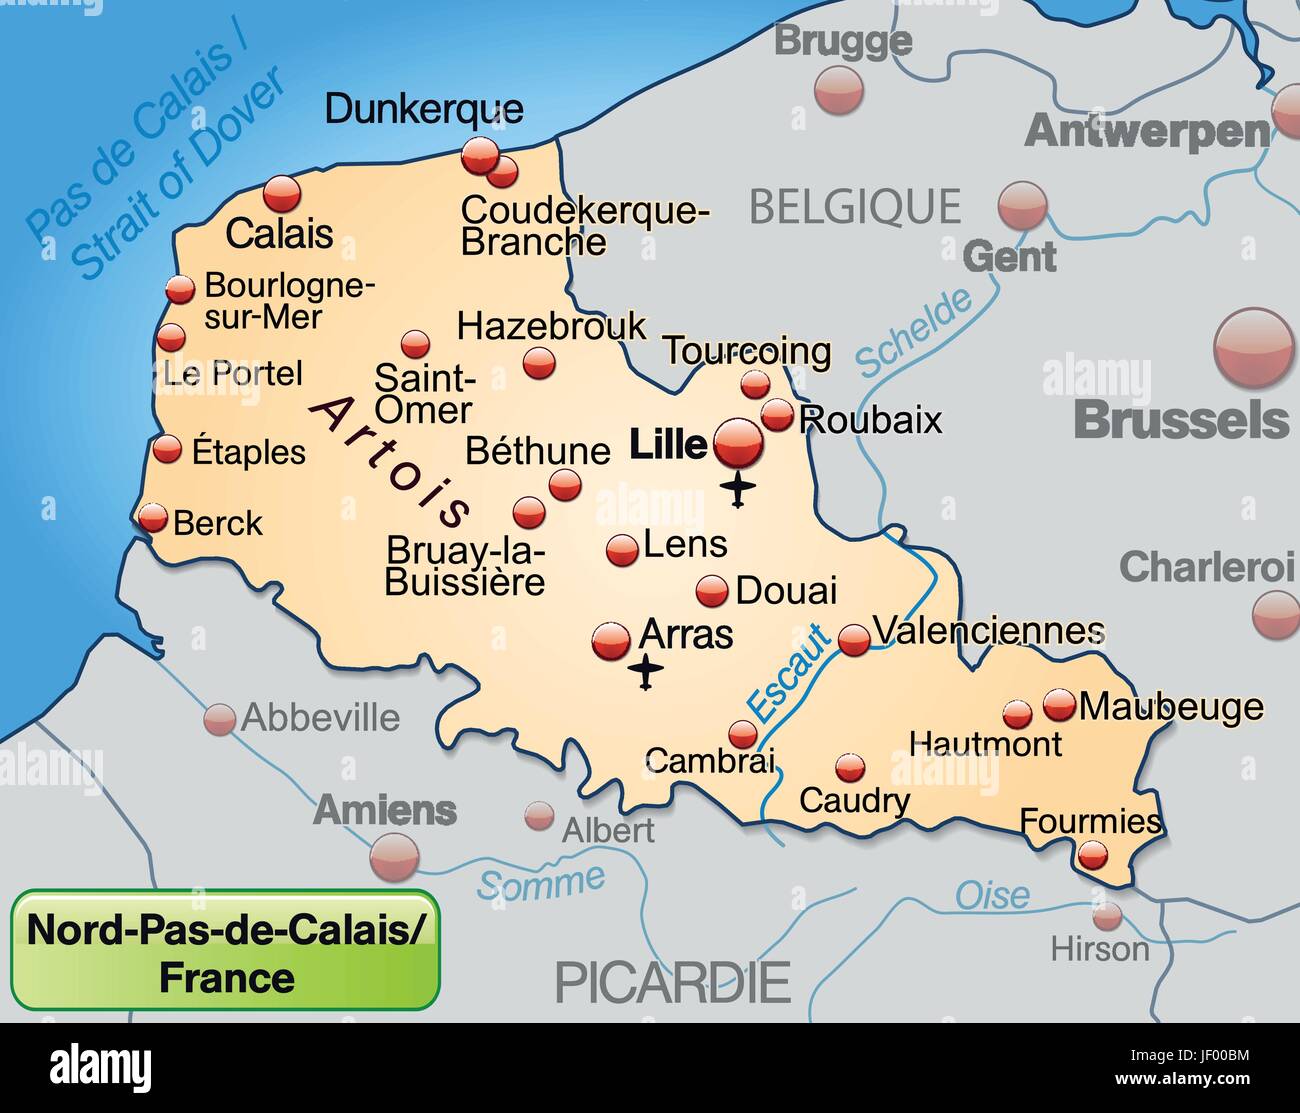 nord-pas-de-calais in france as an environment map of all the topographic information in pastel orange. the appealing Stock Vector